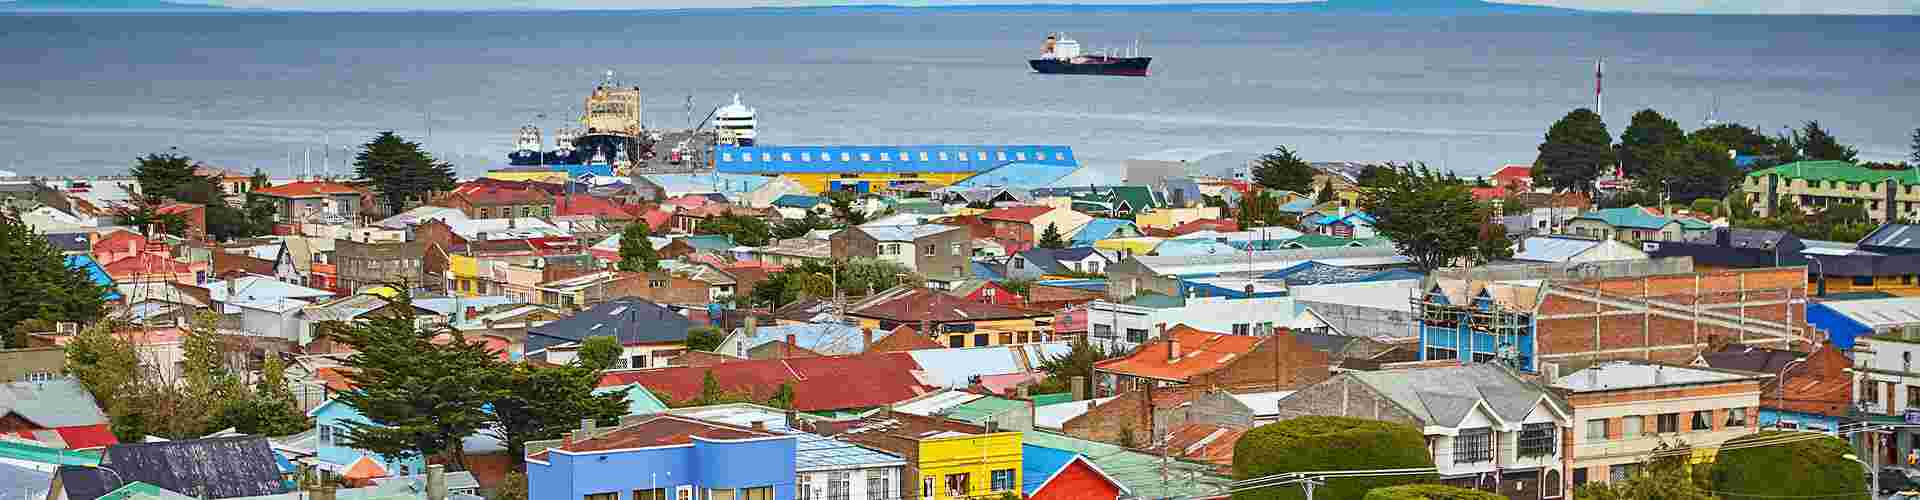 The colourful buildings of Punta Arenas with the bay area and a few large expedition ships in the background